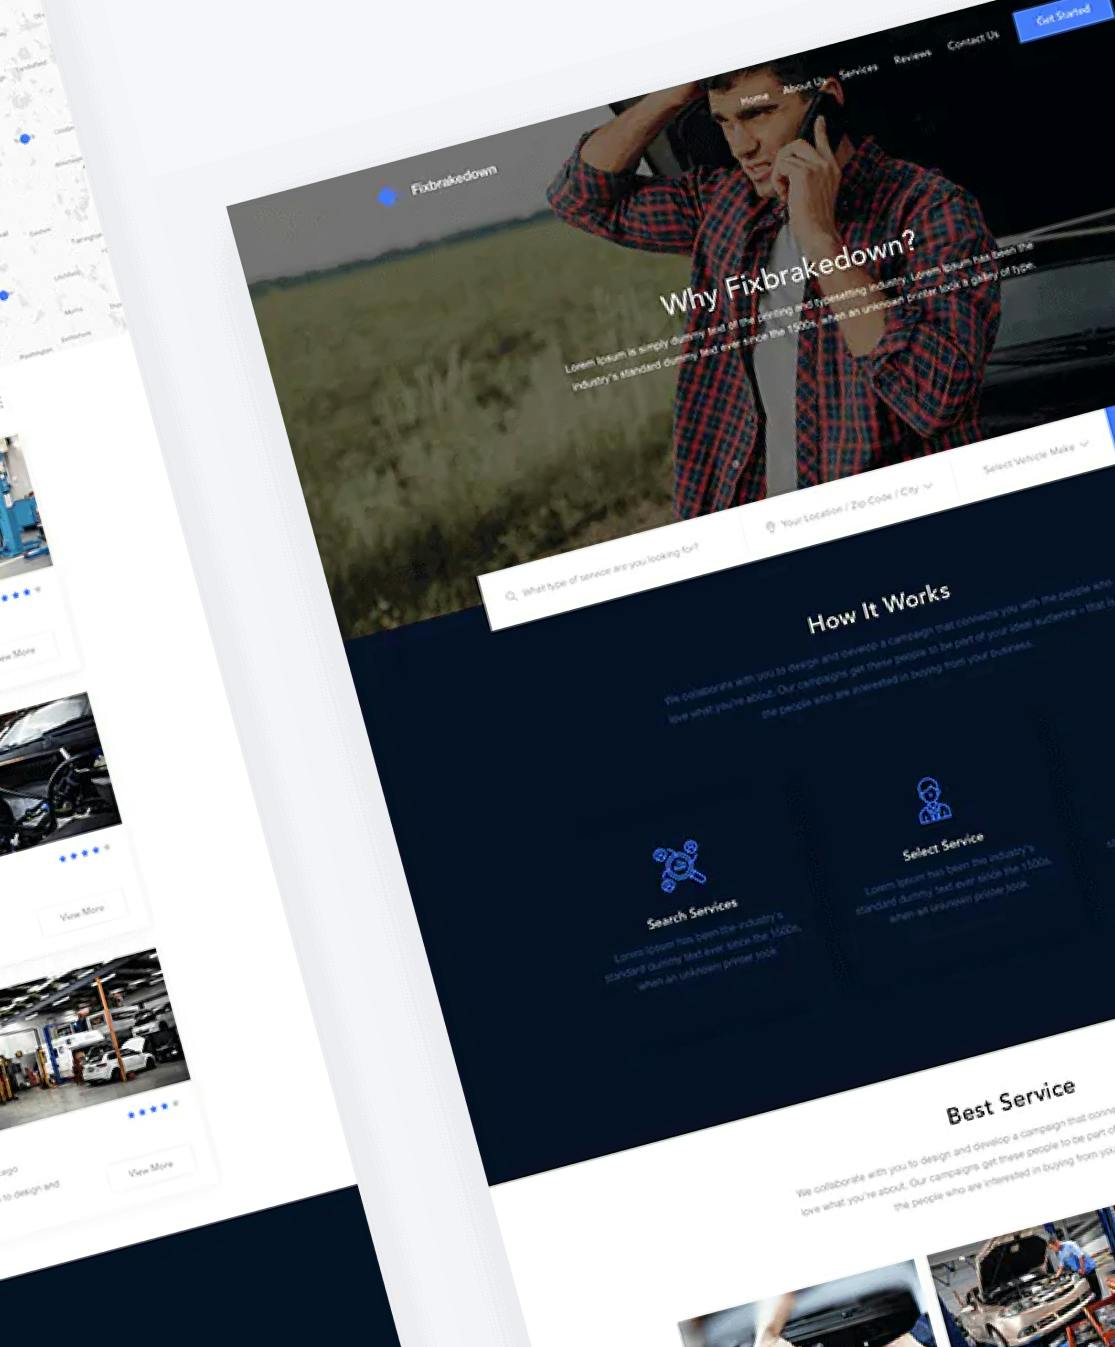 IntellRocket created a responsive website for an advanced vehicle service with a modern design